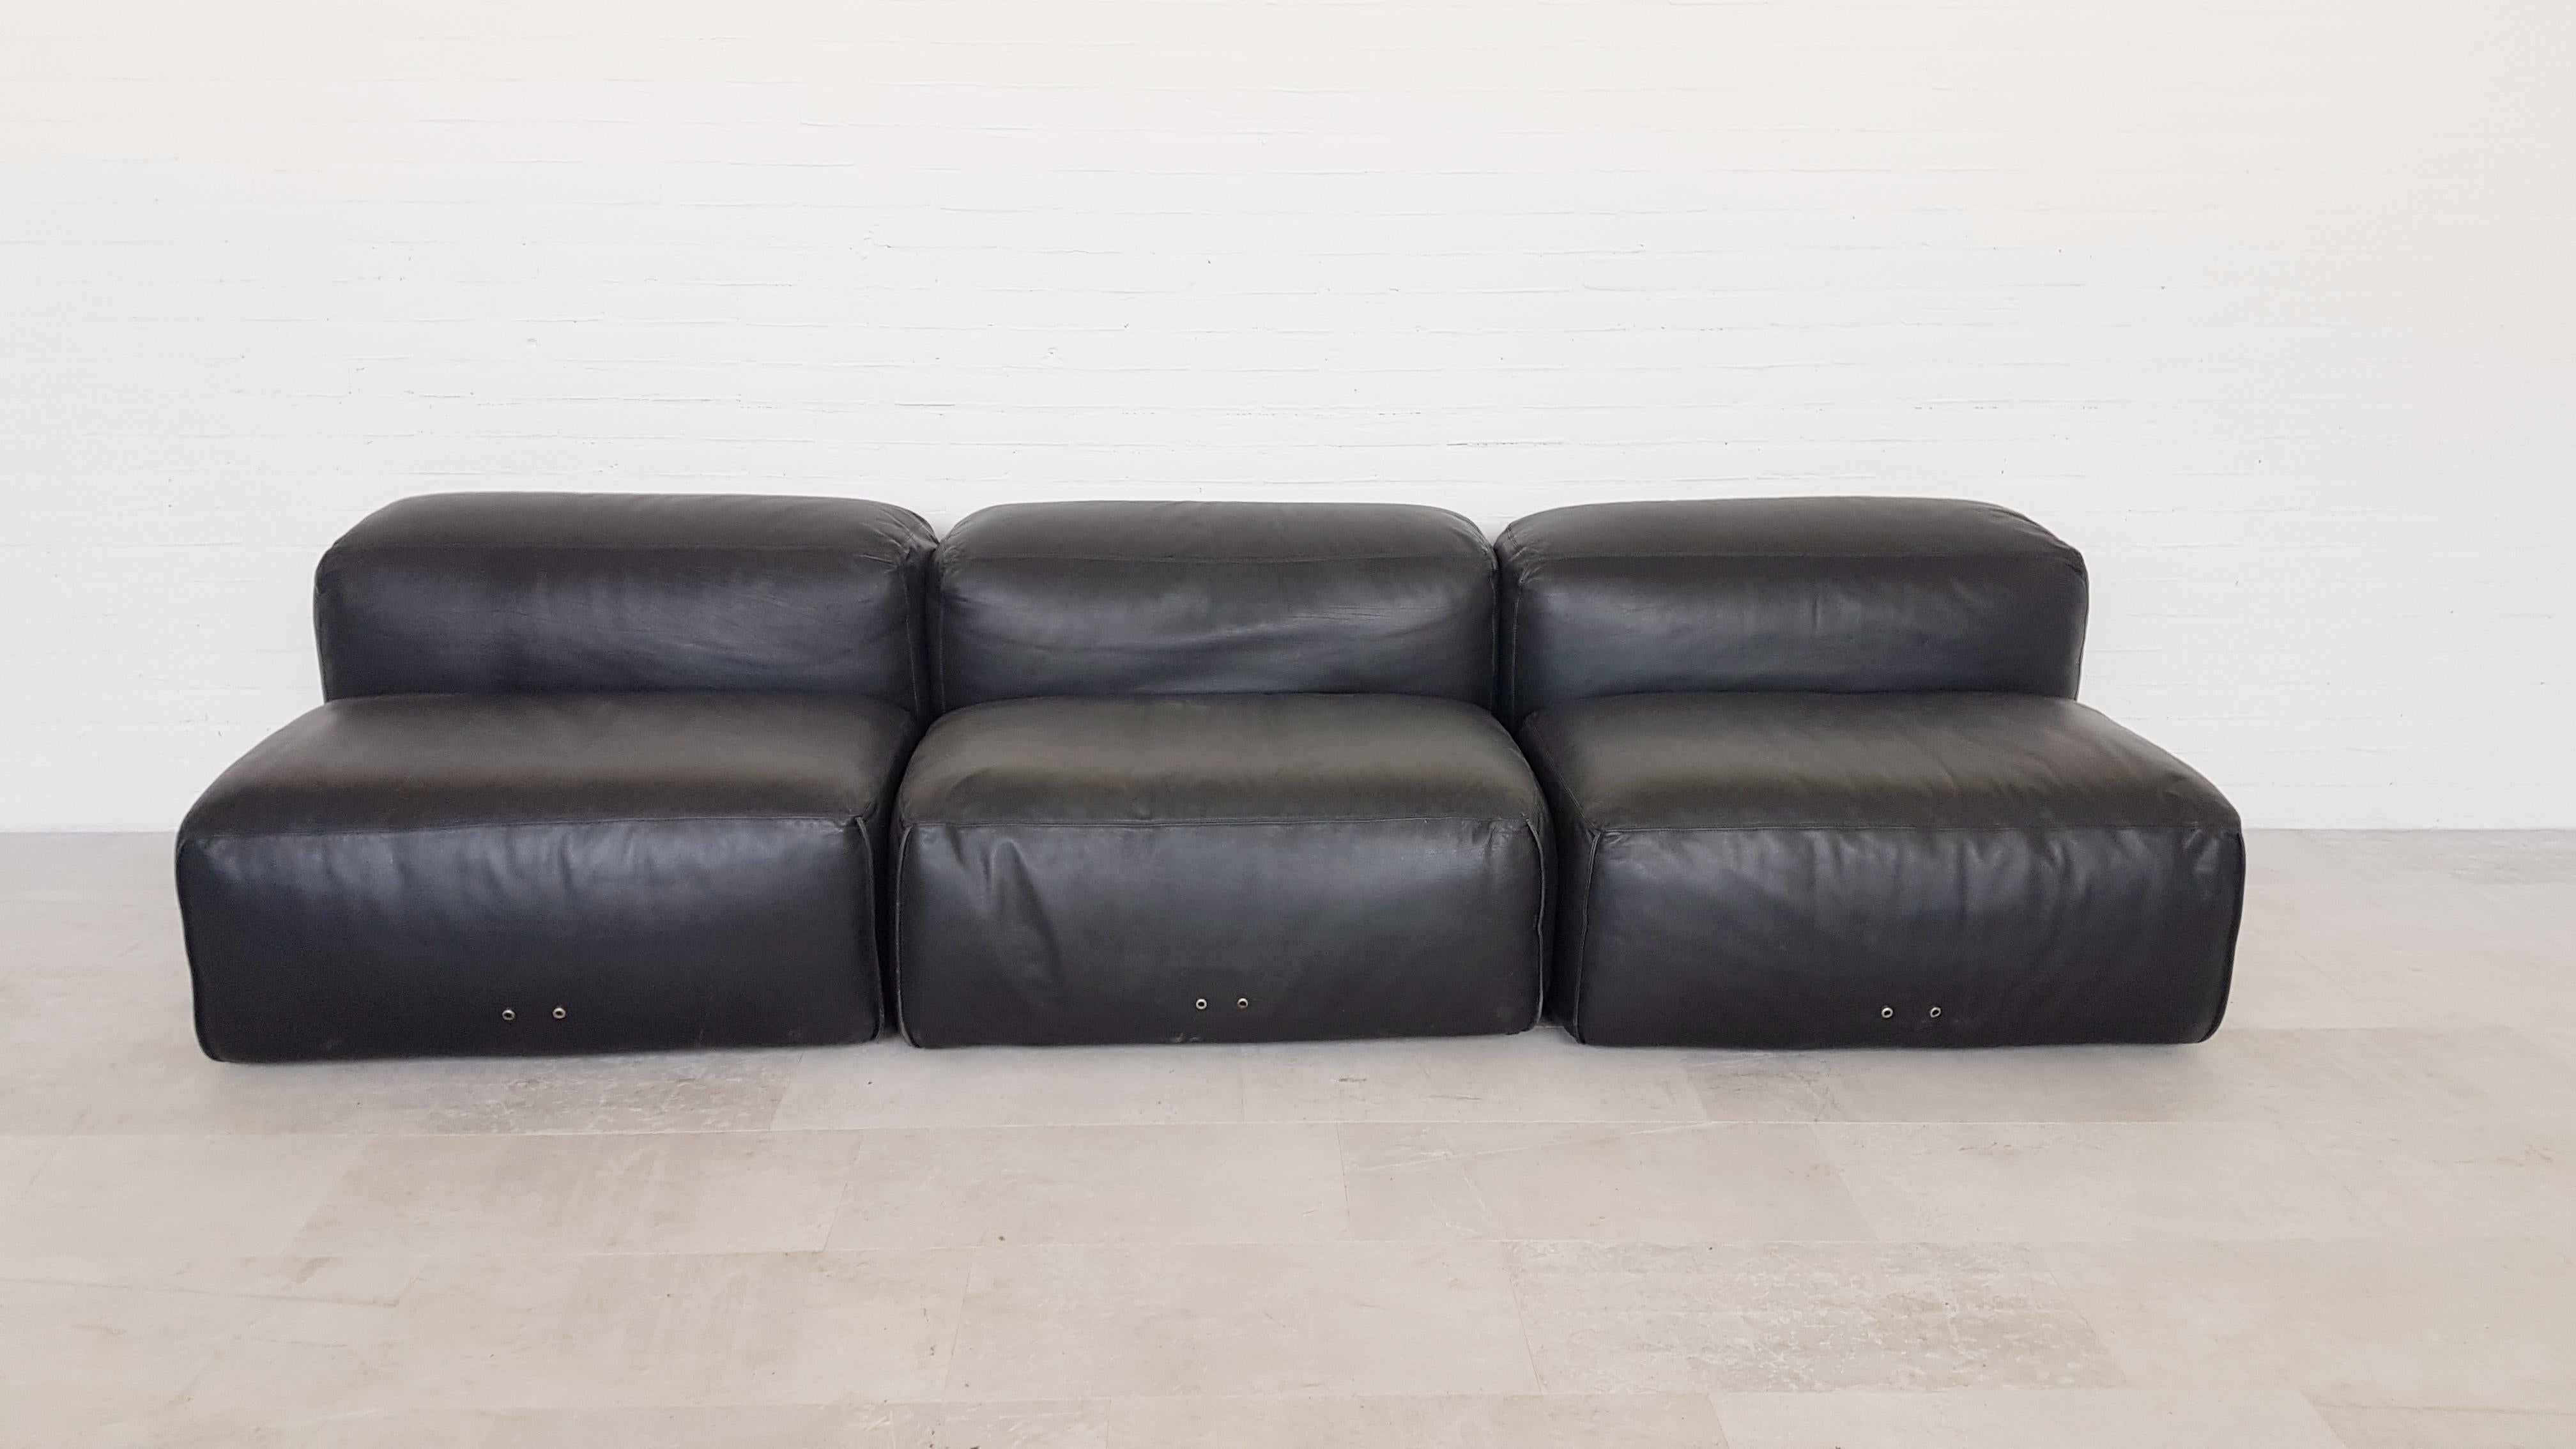 Modular Cassina sectional sofa designed by Mario Bellini. 
Beautiful Italian design piece from the 1970s. 
In black original leather.

Mario Bellini (born February 1, 1935, Milan) is an Italian architect and designer. He graduated from the Milan